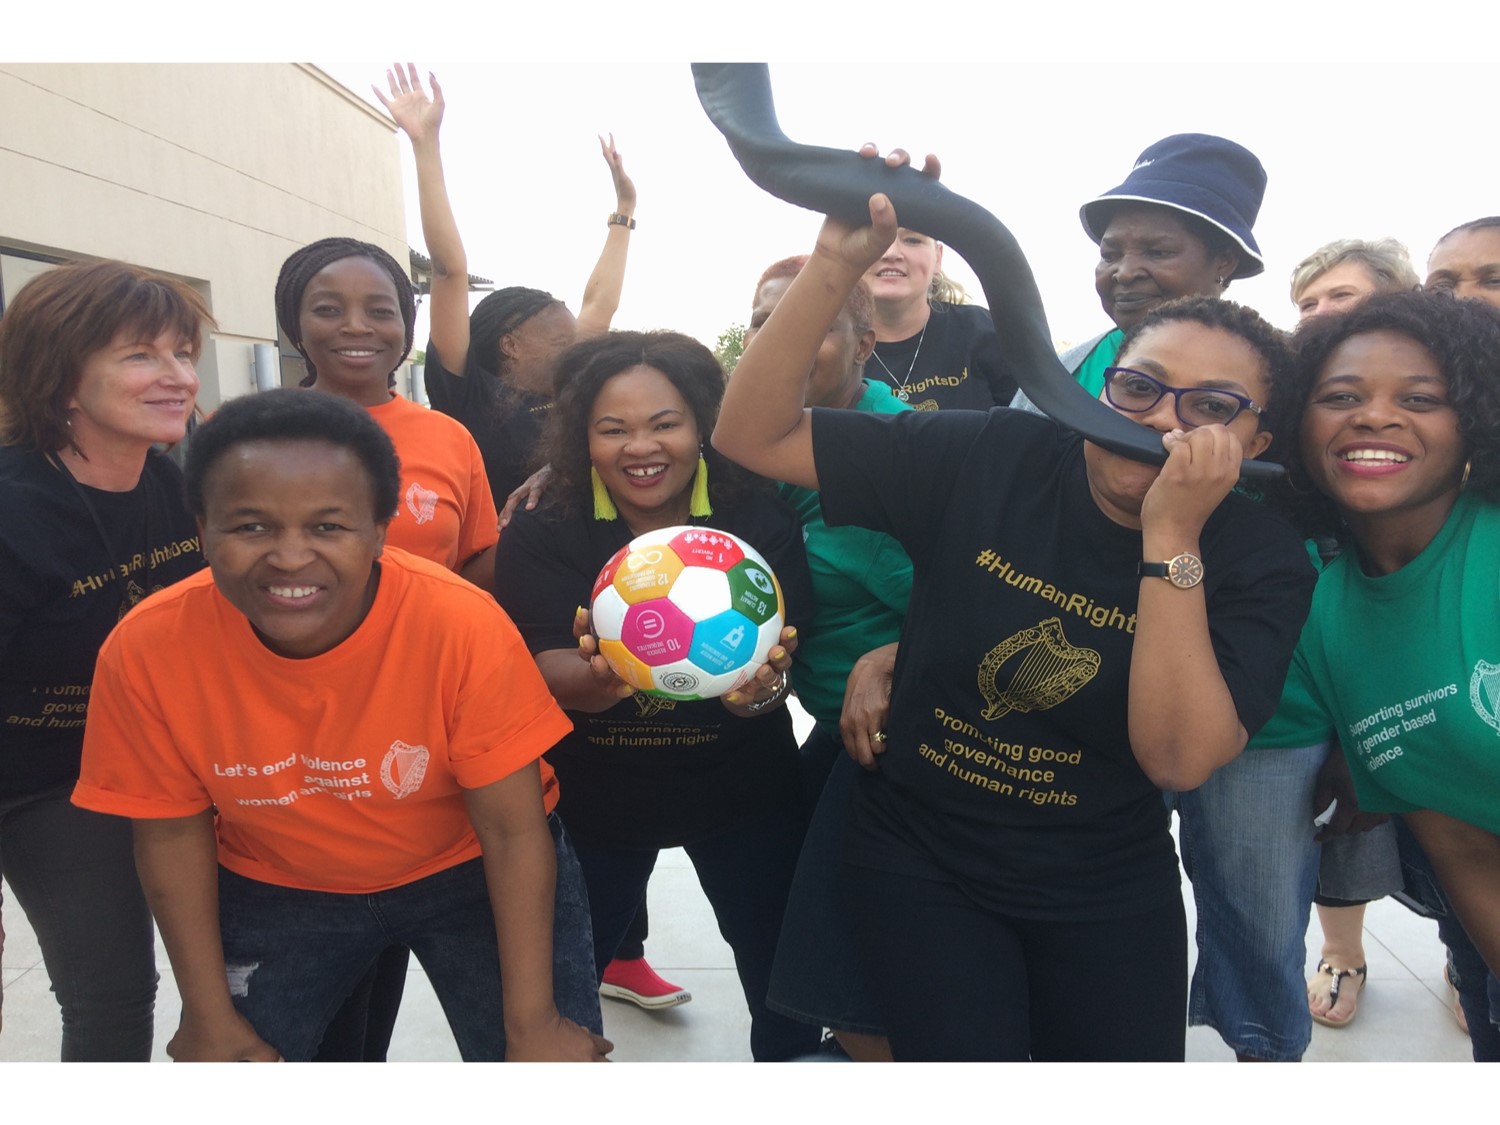 Embassy Team preparing for Global Goals World Cup